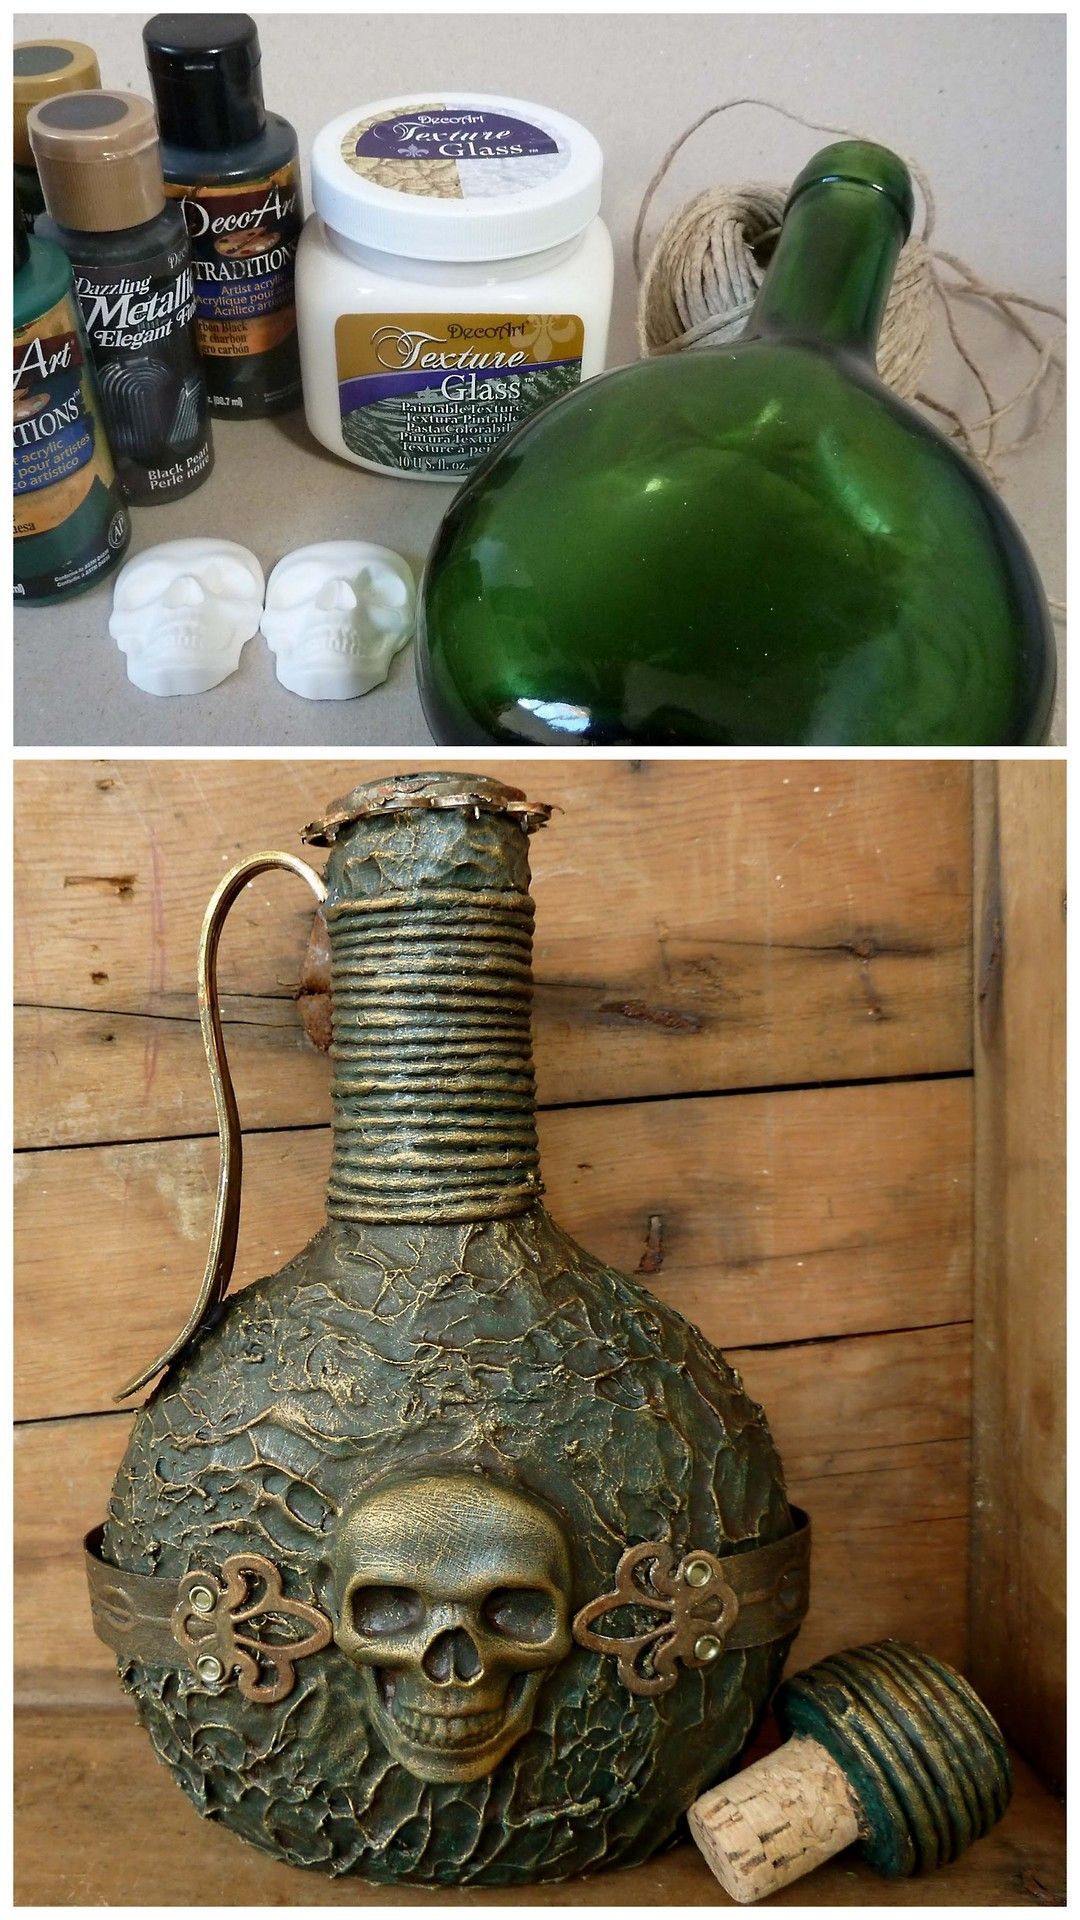 DIY Pirate Bottle Tutorial from Angelica. Incredibly detailed tutorial for how to turn a plain bottle into something really